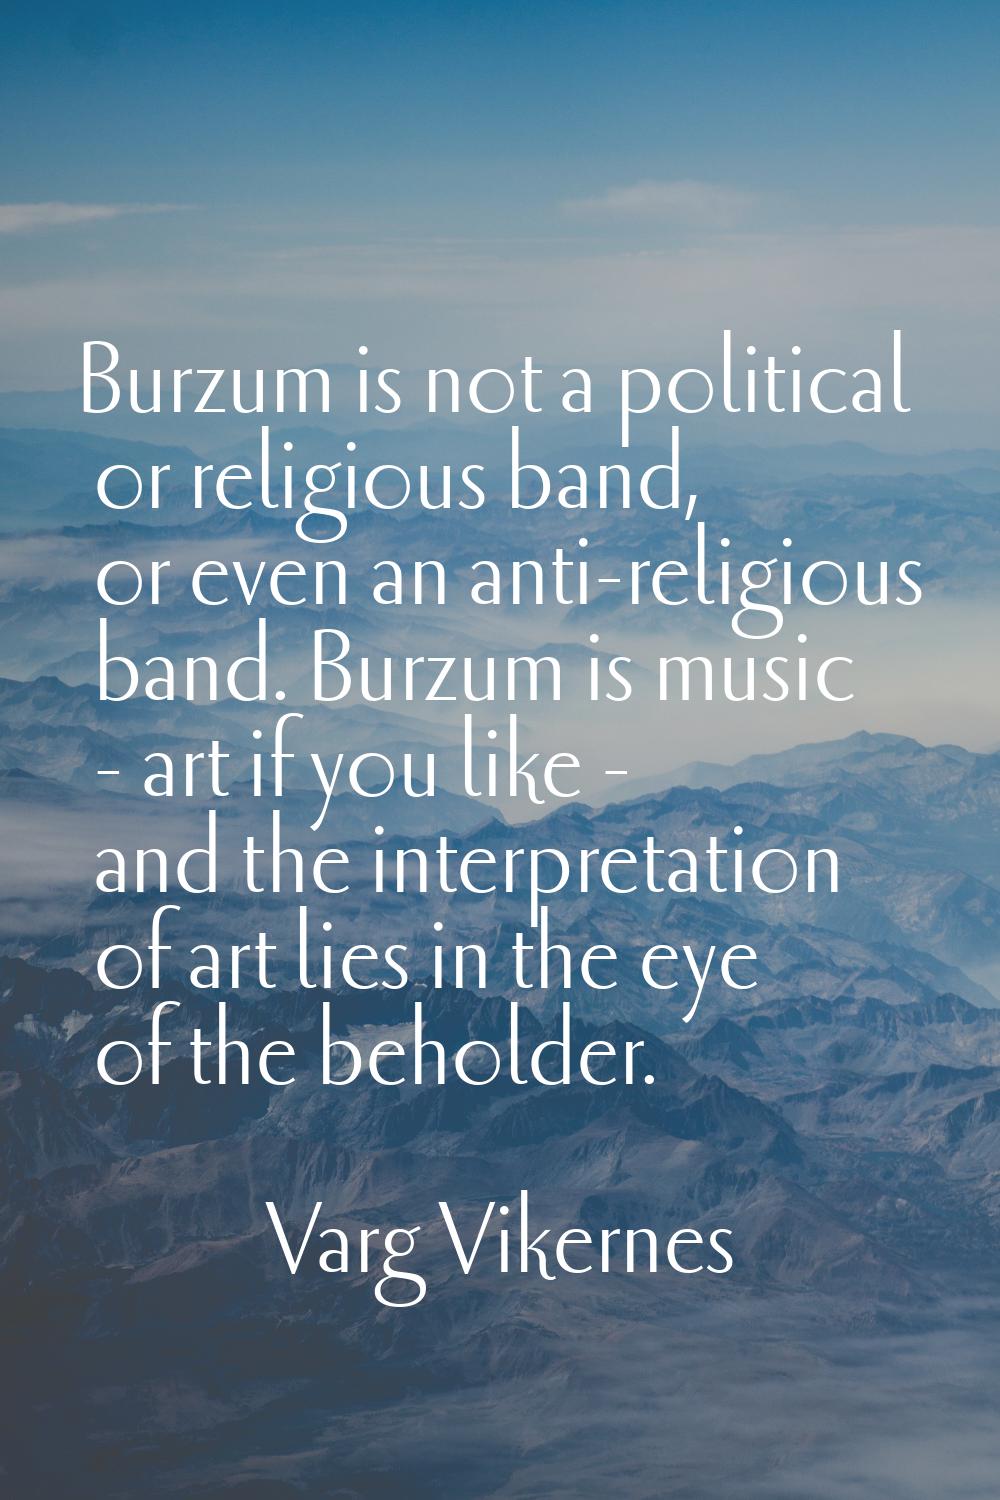 Burzum is not a political or religious band, or even an anti-religious band. Burzum is music - art 